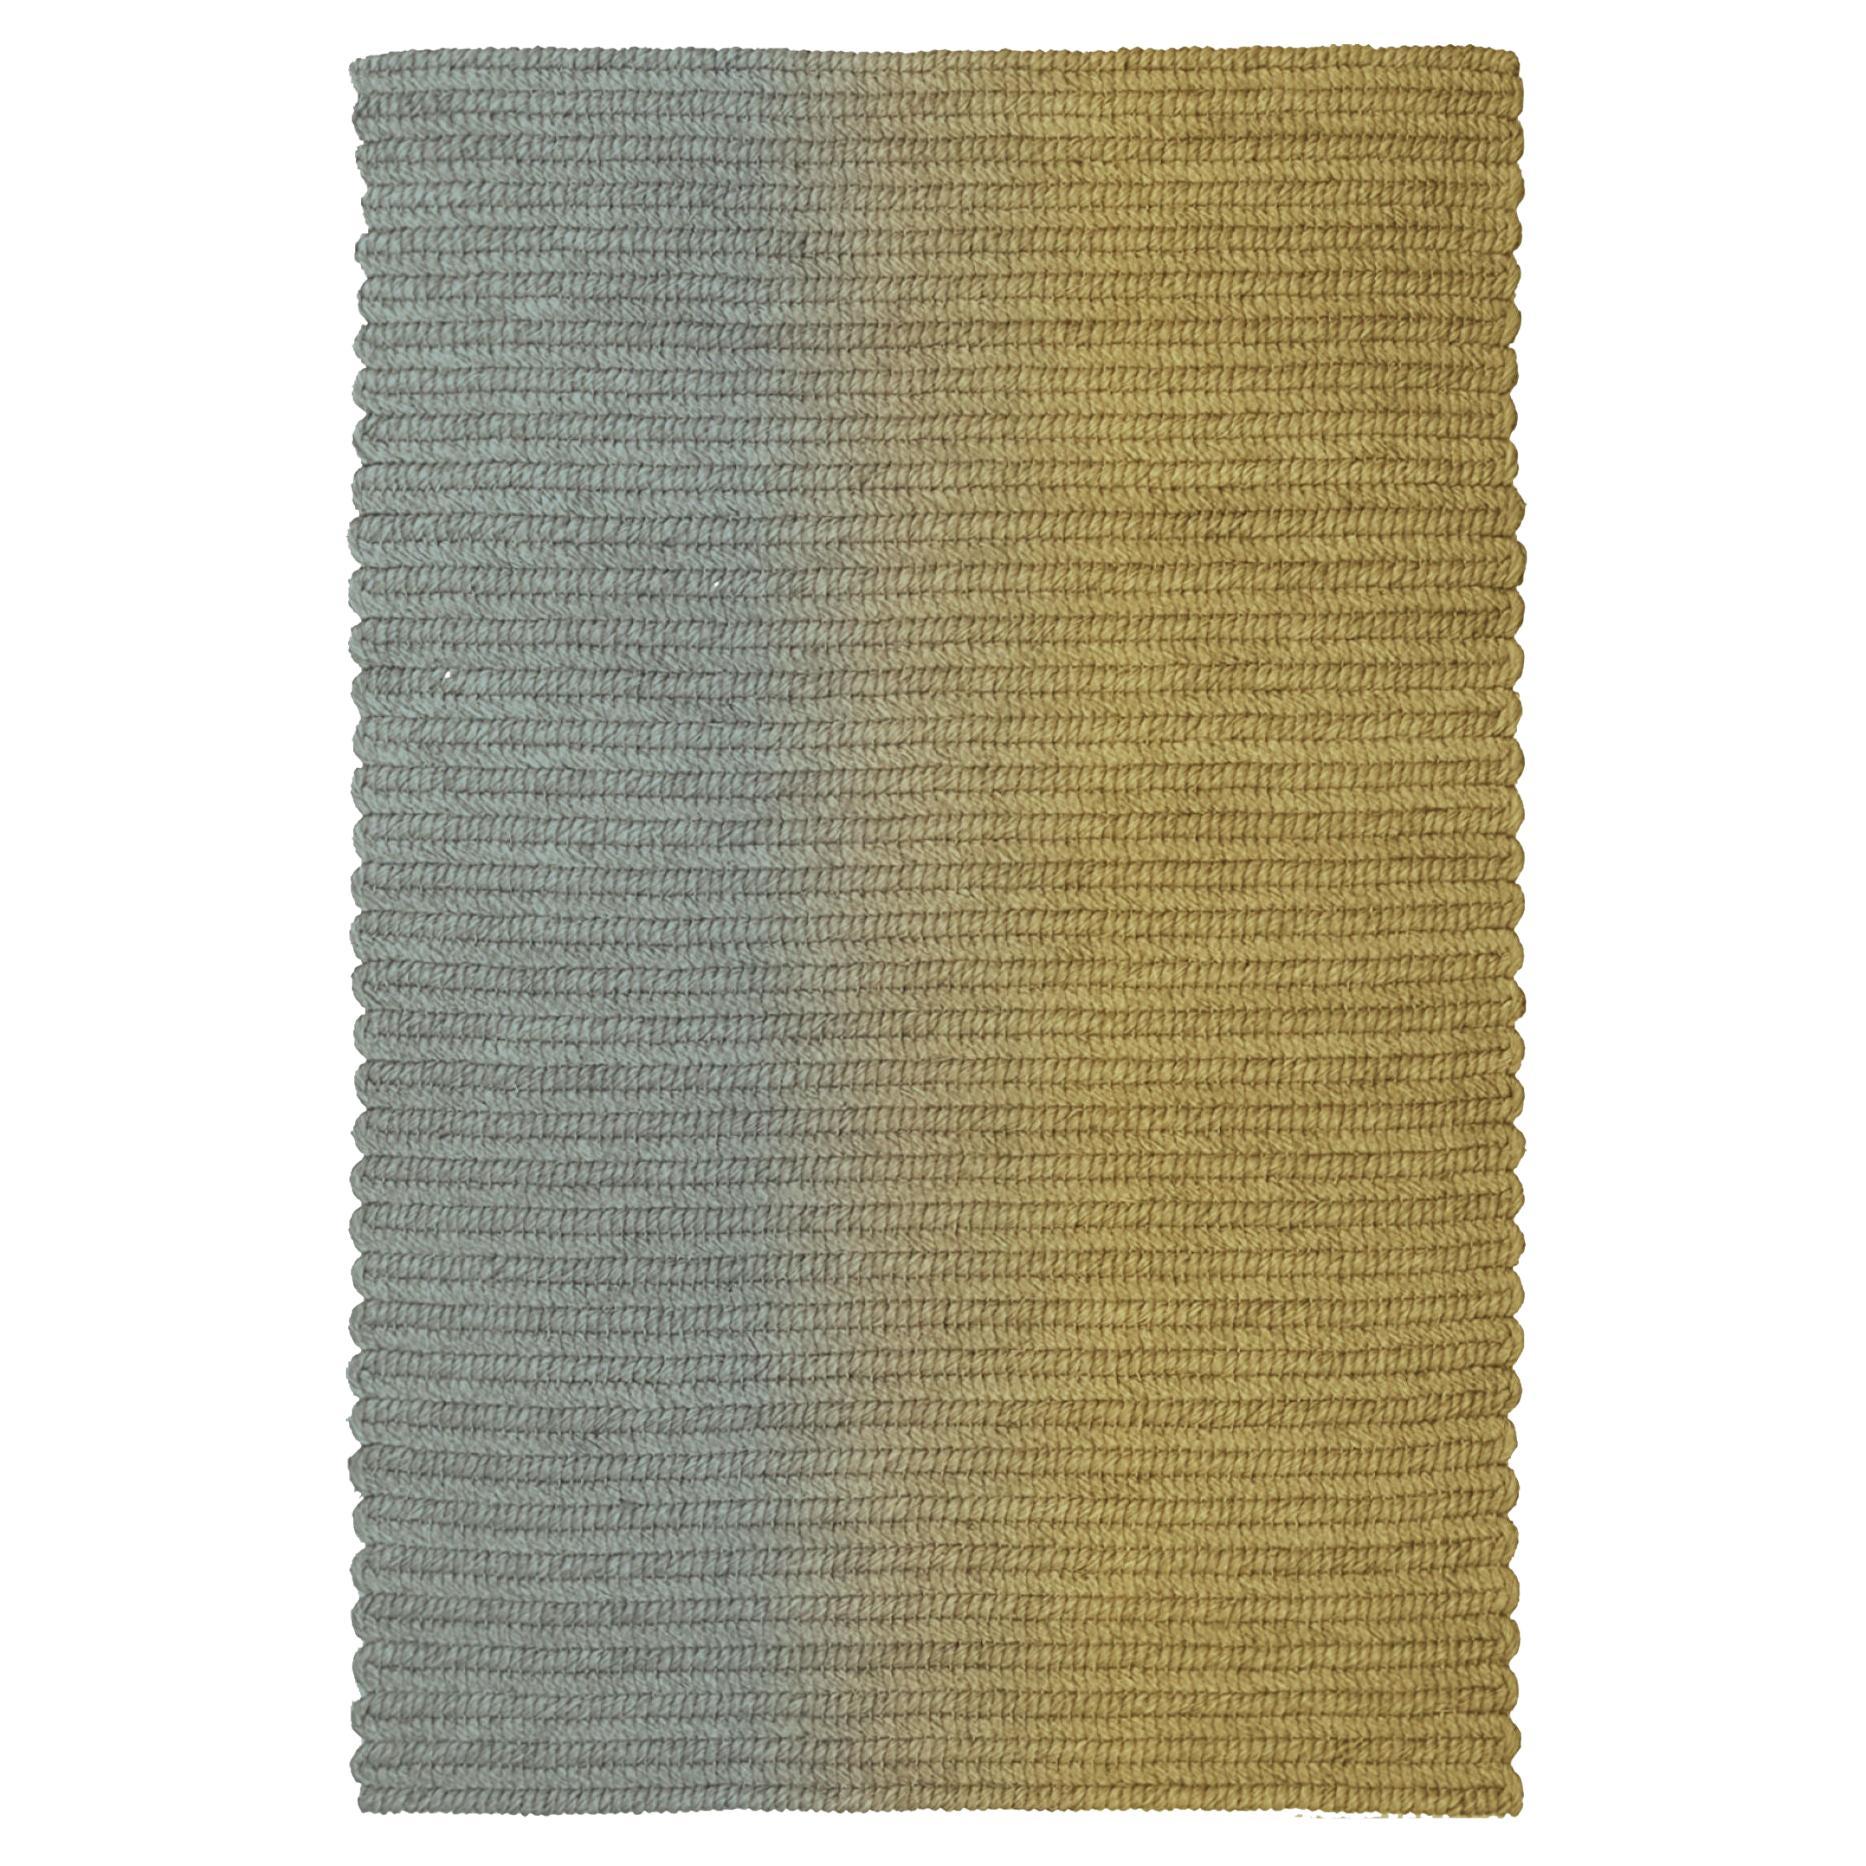 'Switch' Rug in Abaca, 'Pampas', by Claire Vos for Musett Design